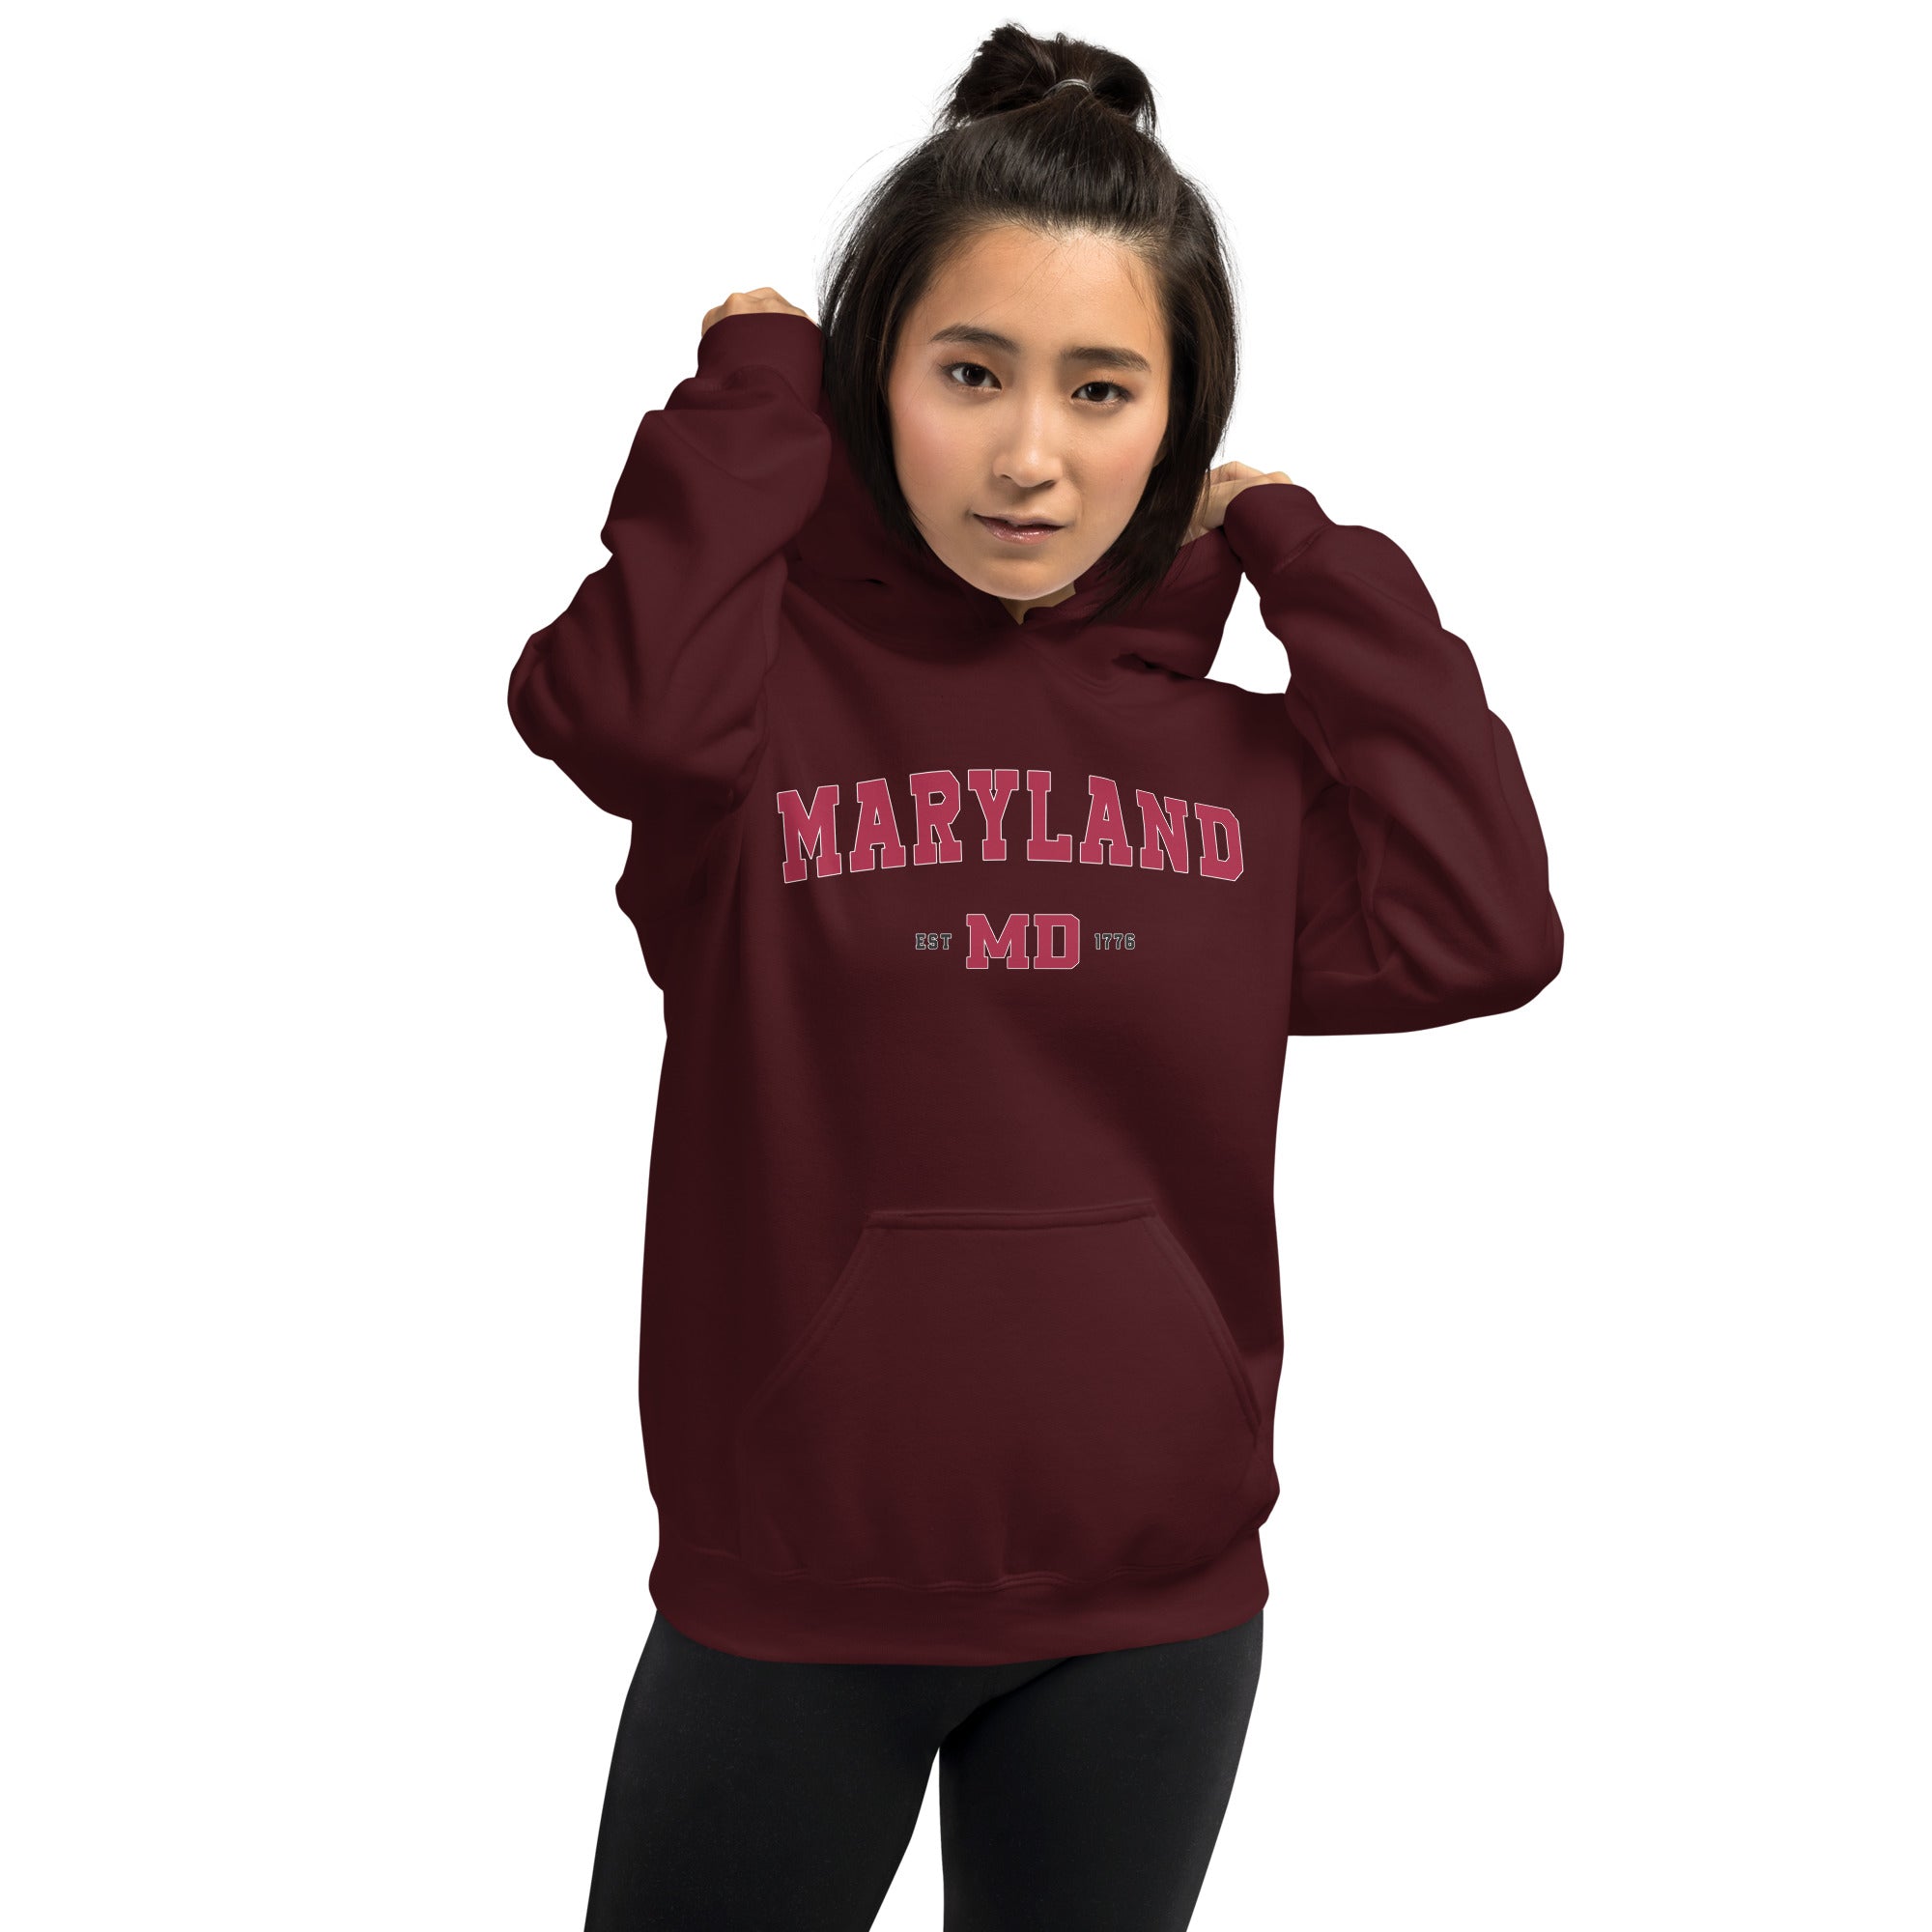 Maryland Hoodie | MD State One Piece Pullover Hoodie Women